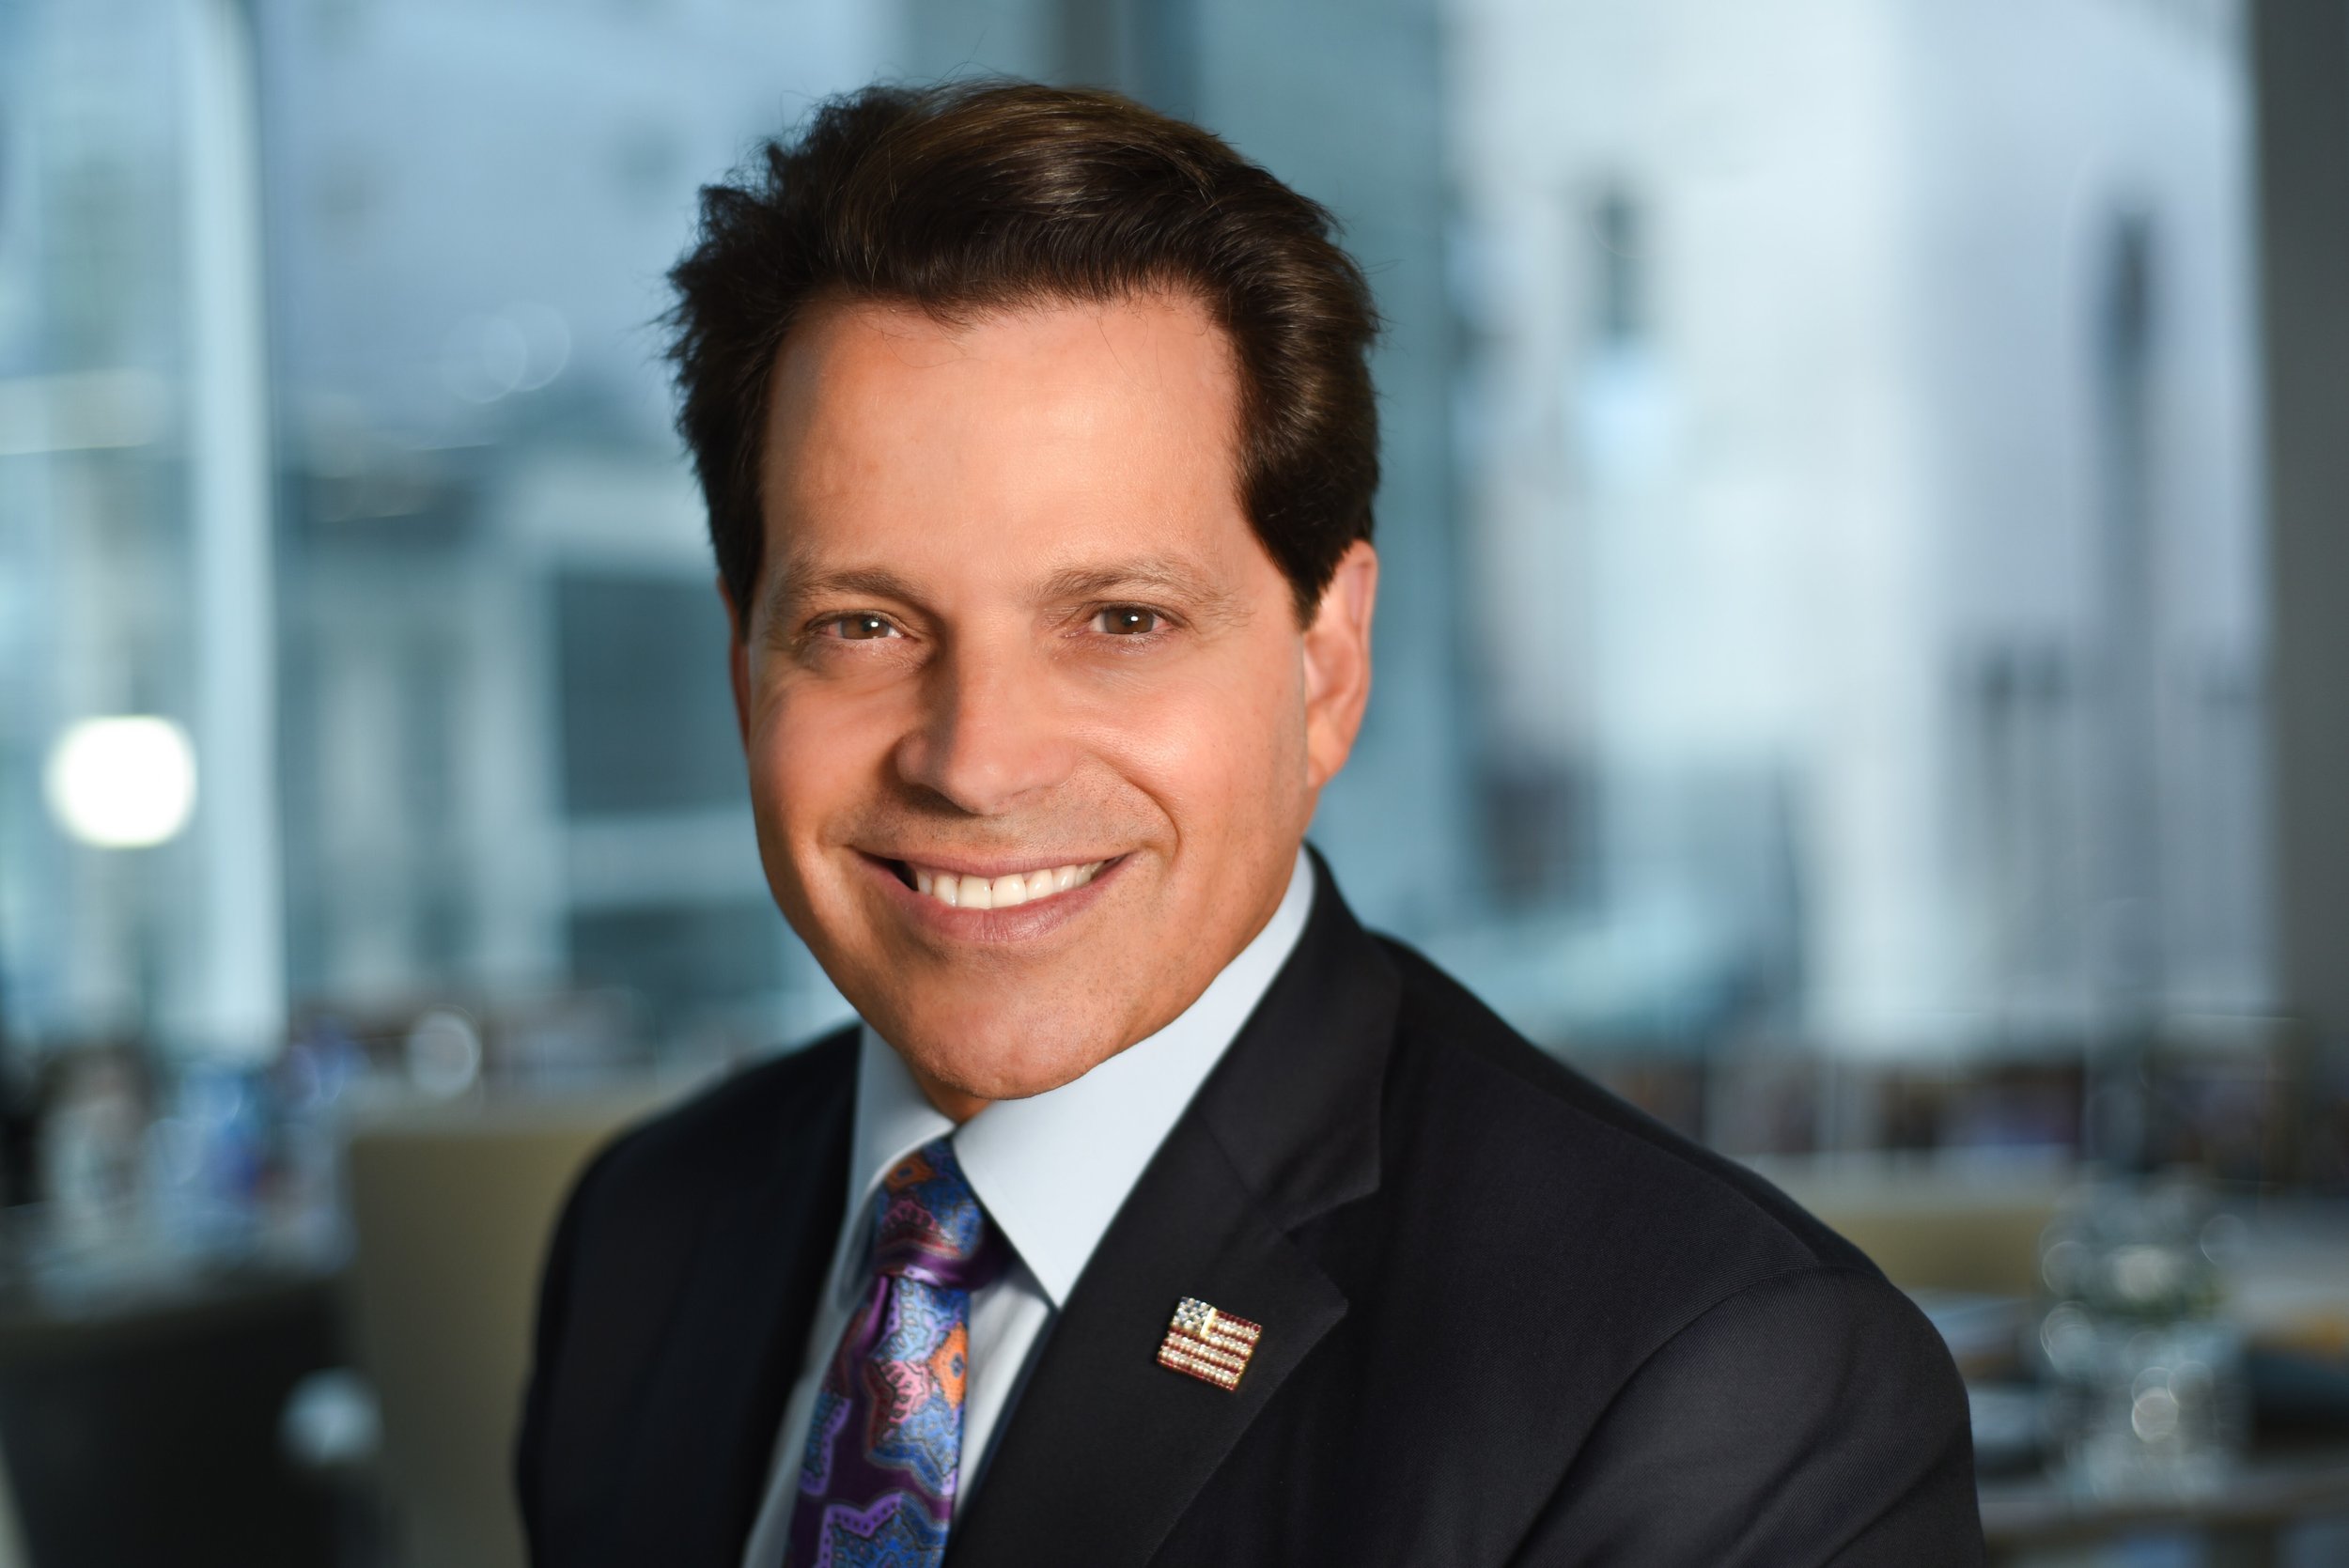 Anthony Scaramucci - Former White House Director of Communications